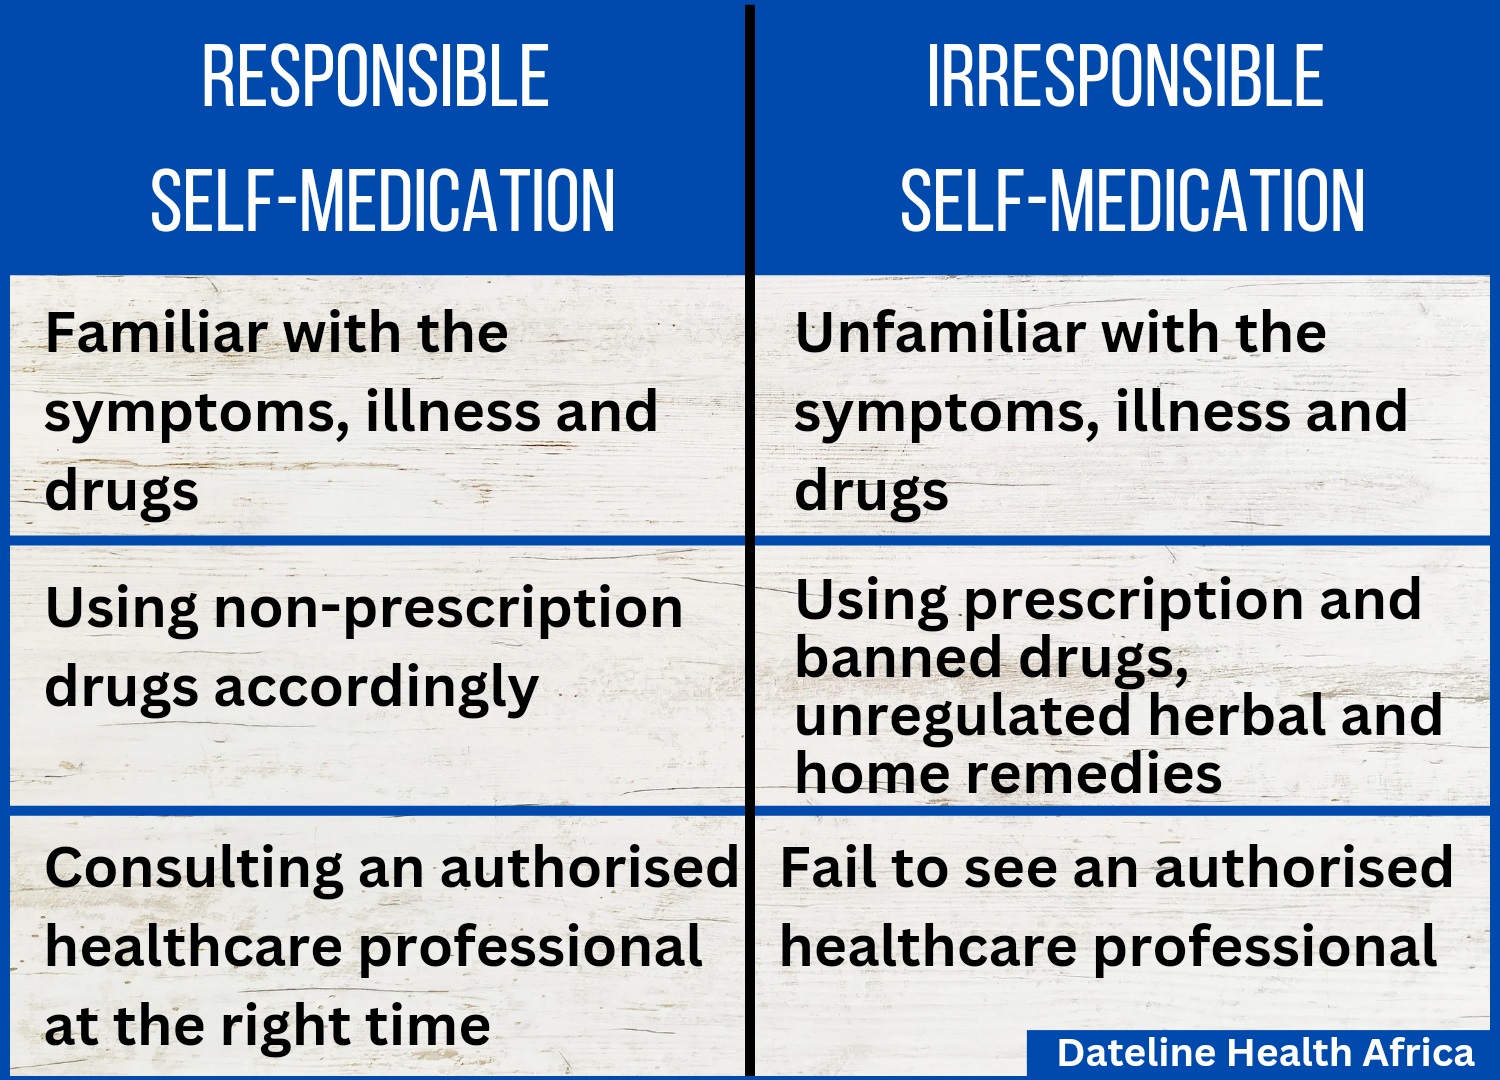 Types of self-medication: responsible and irresponsible self-medication